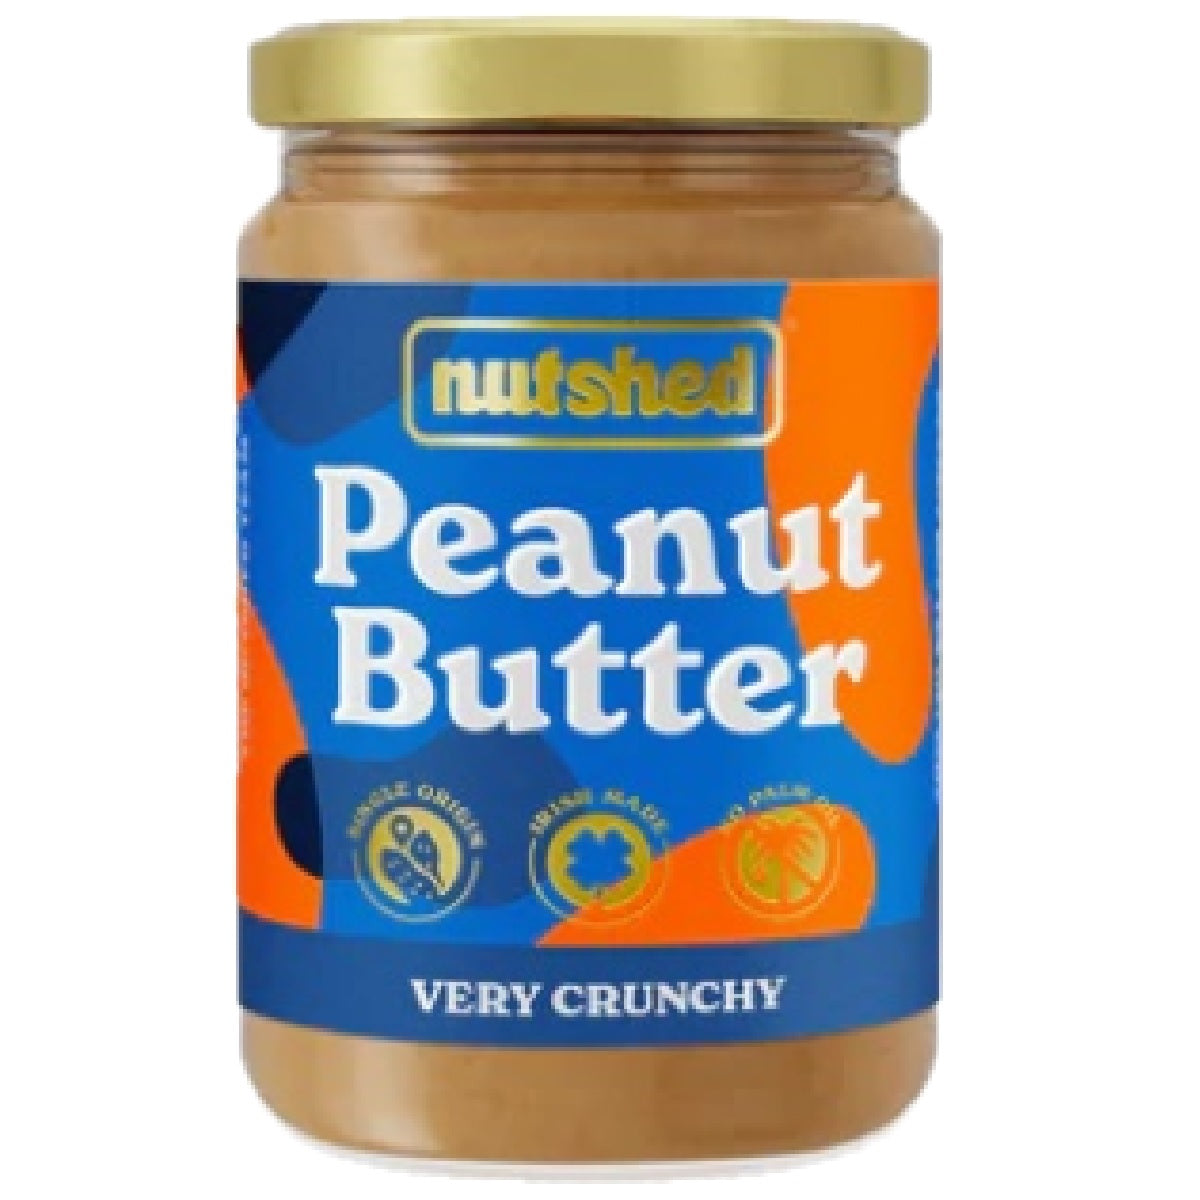 Nutshed Peanut Butter Very Crunchy 290g